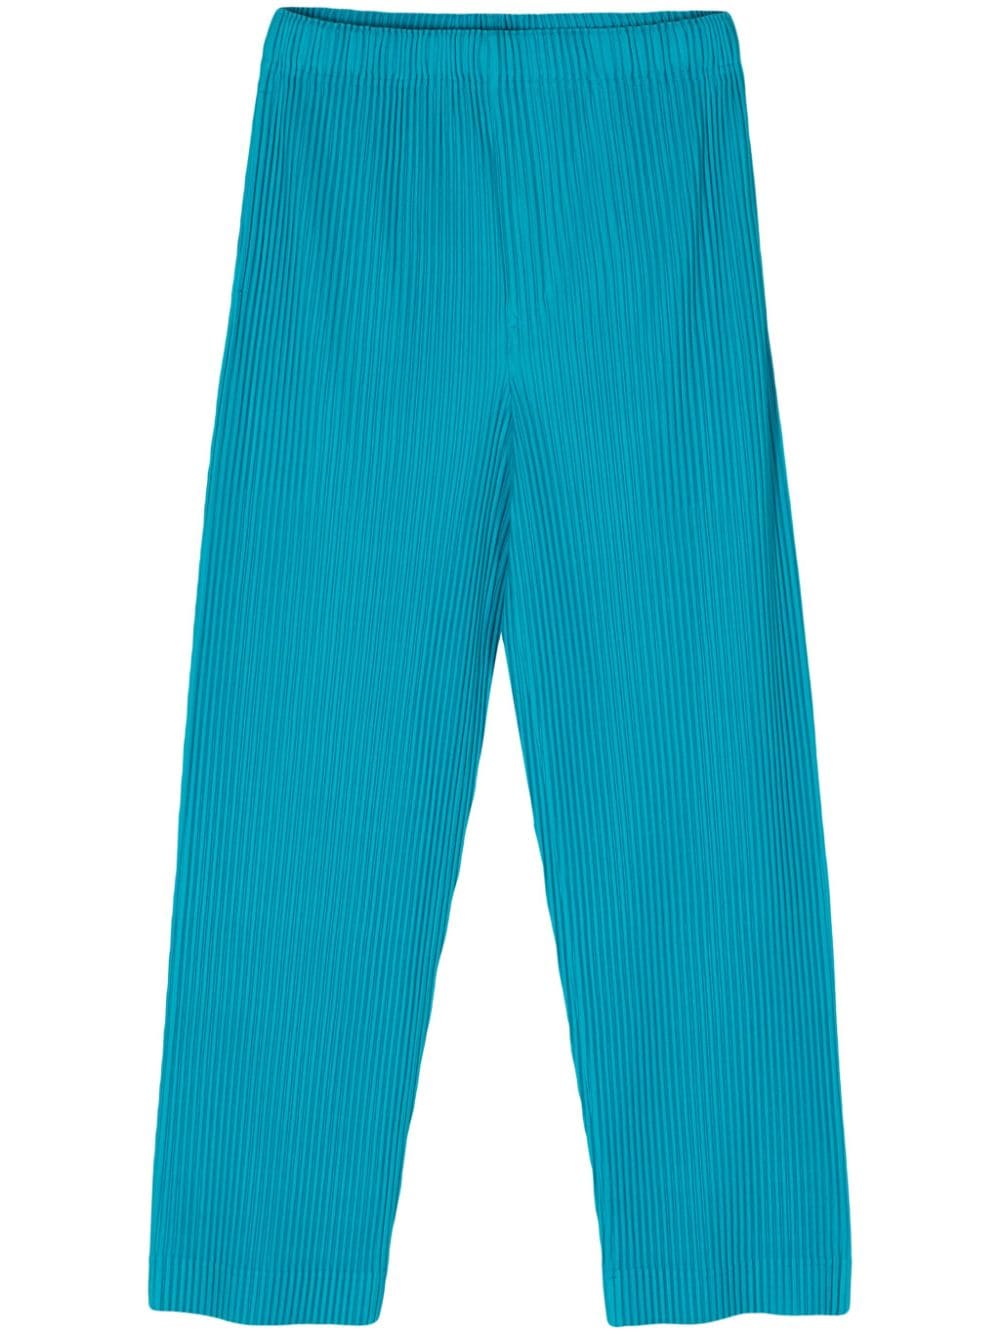 Homme Plissé Issey Miyake MC March pleated trousers - Blue von Homme Plissé Issey Miyake